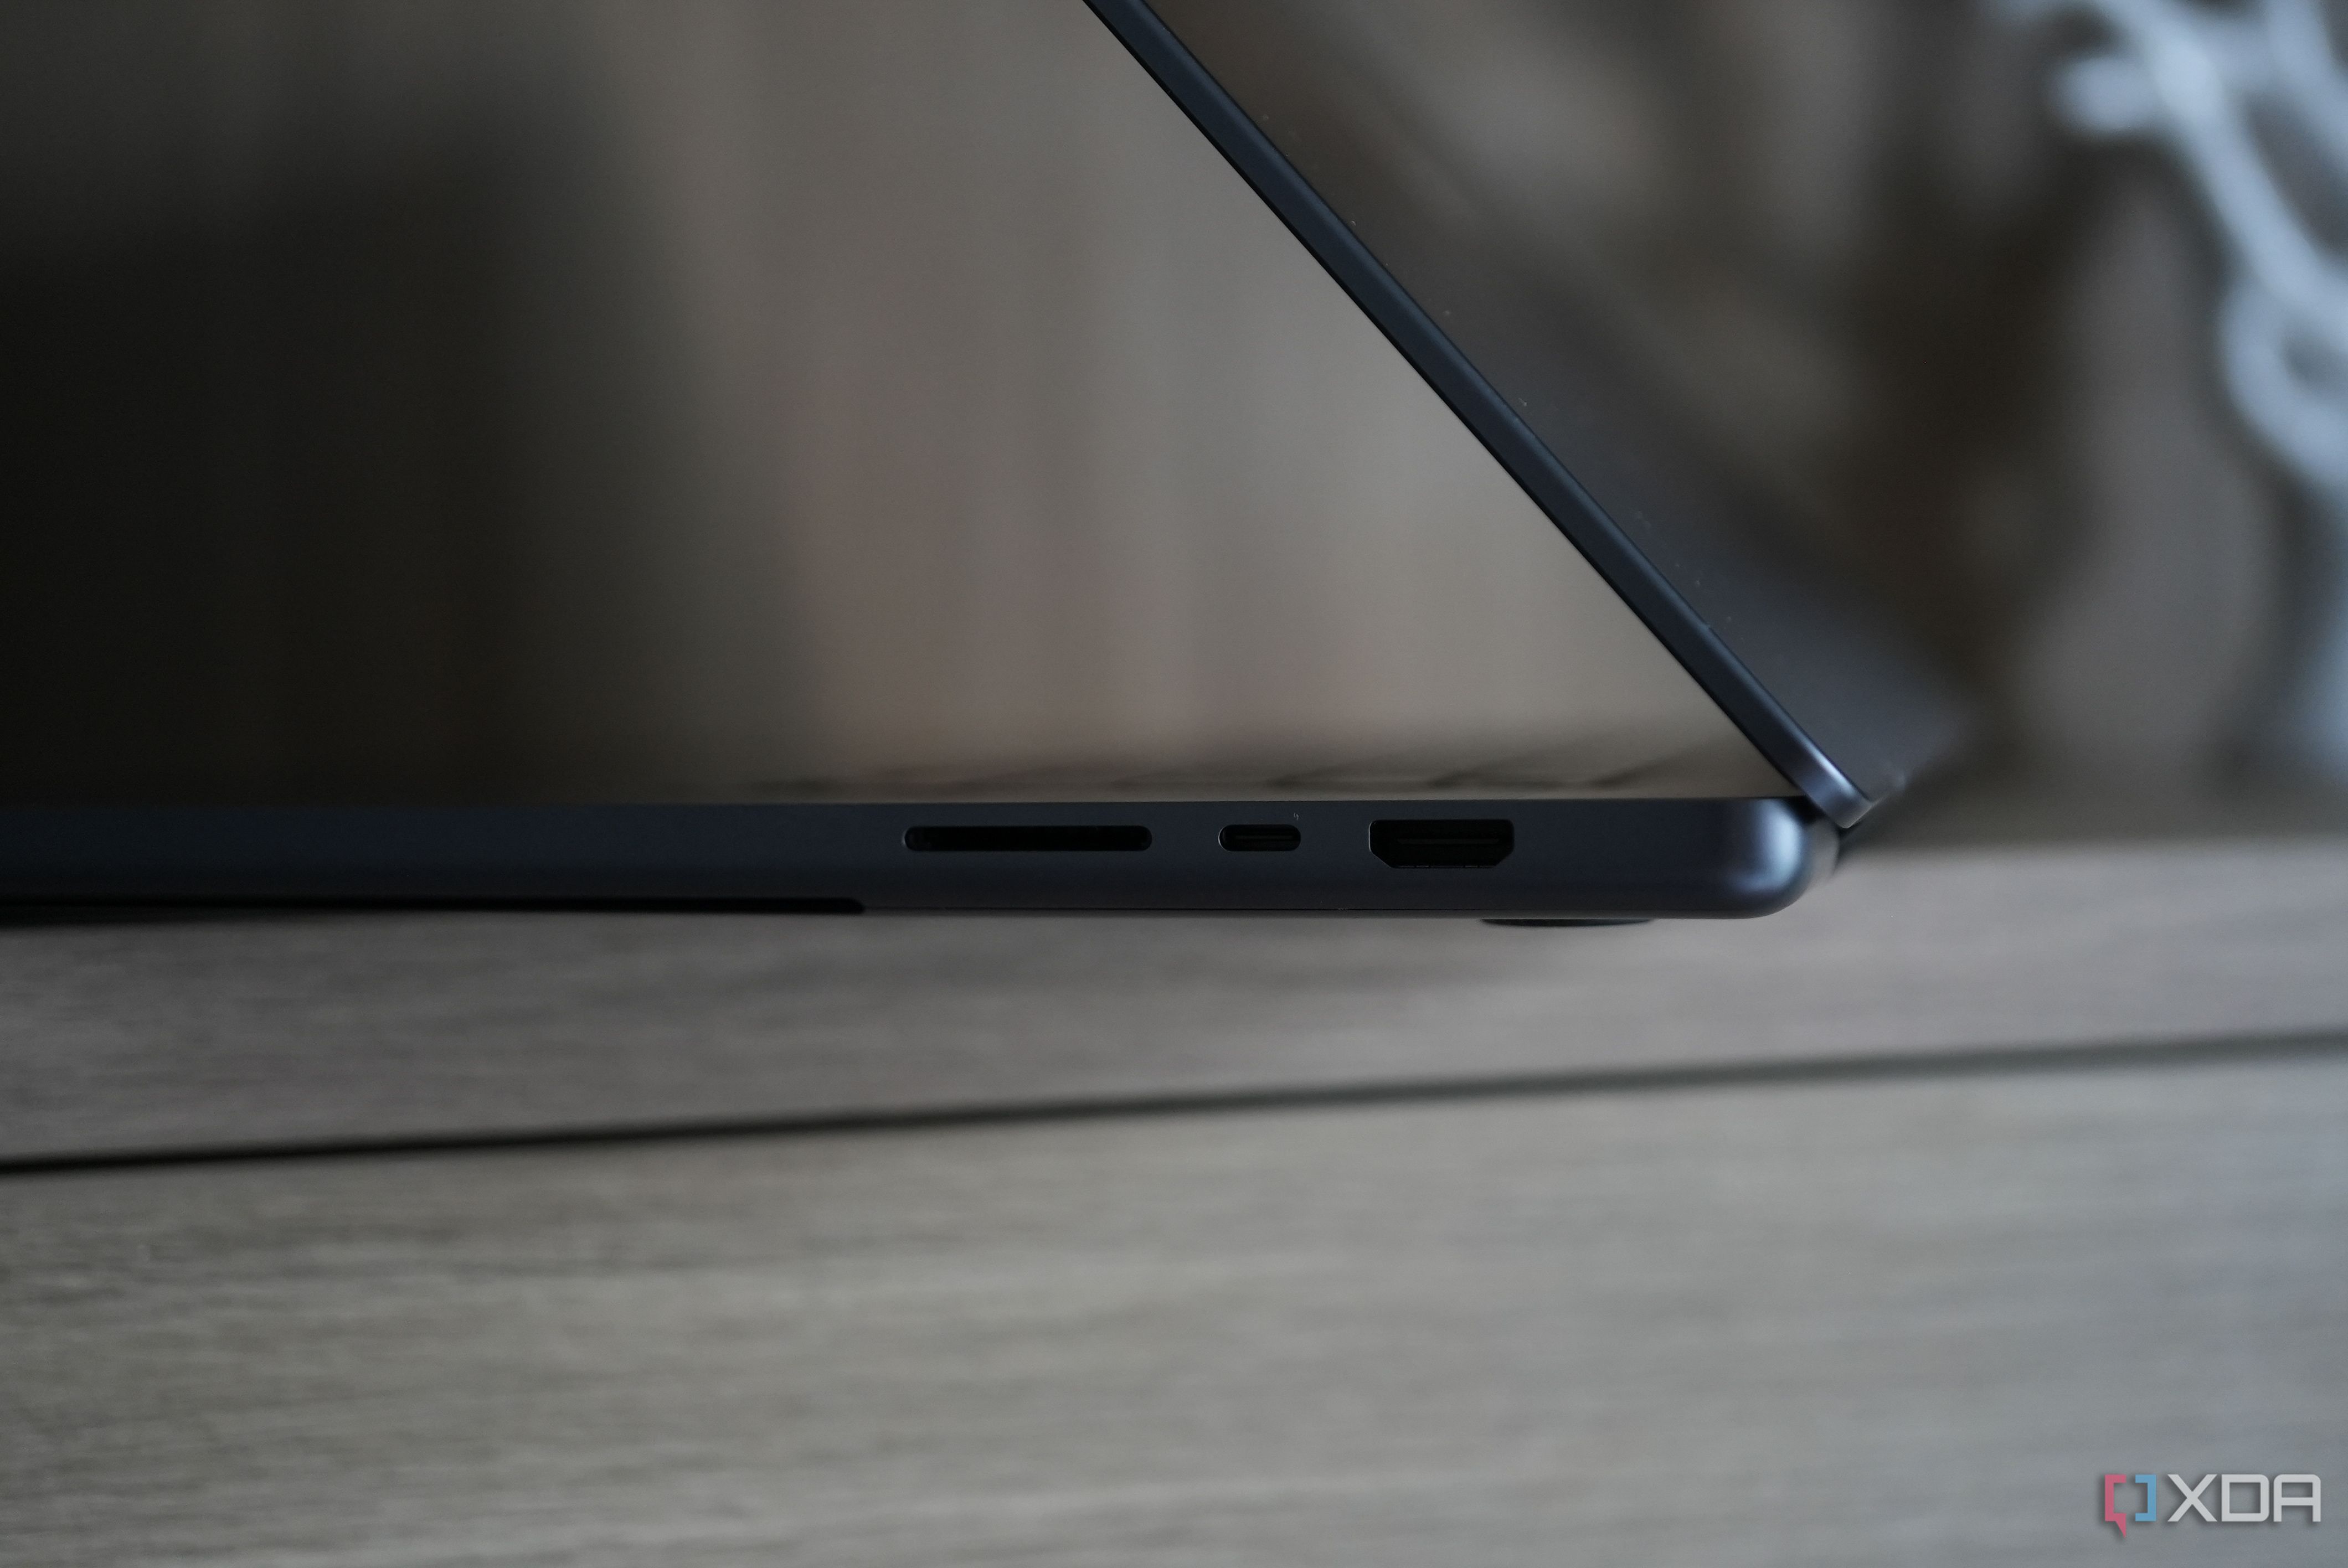 The right side of the MacBook Pro with HDMI, SD card and USB-C ports.